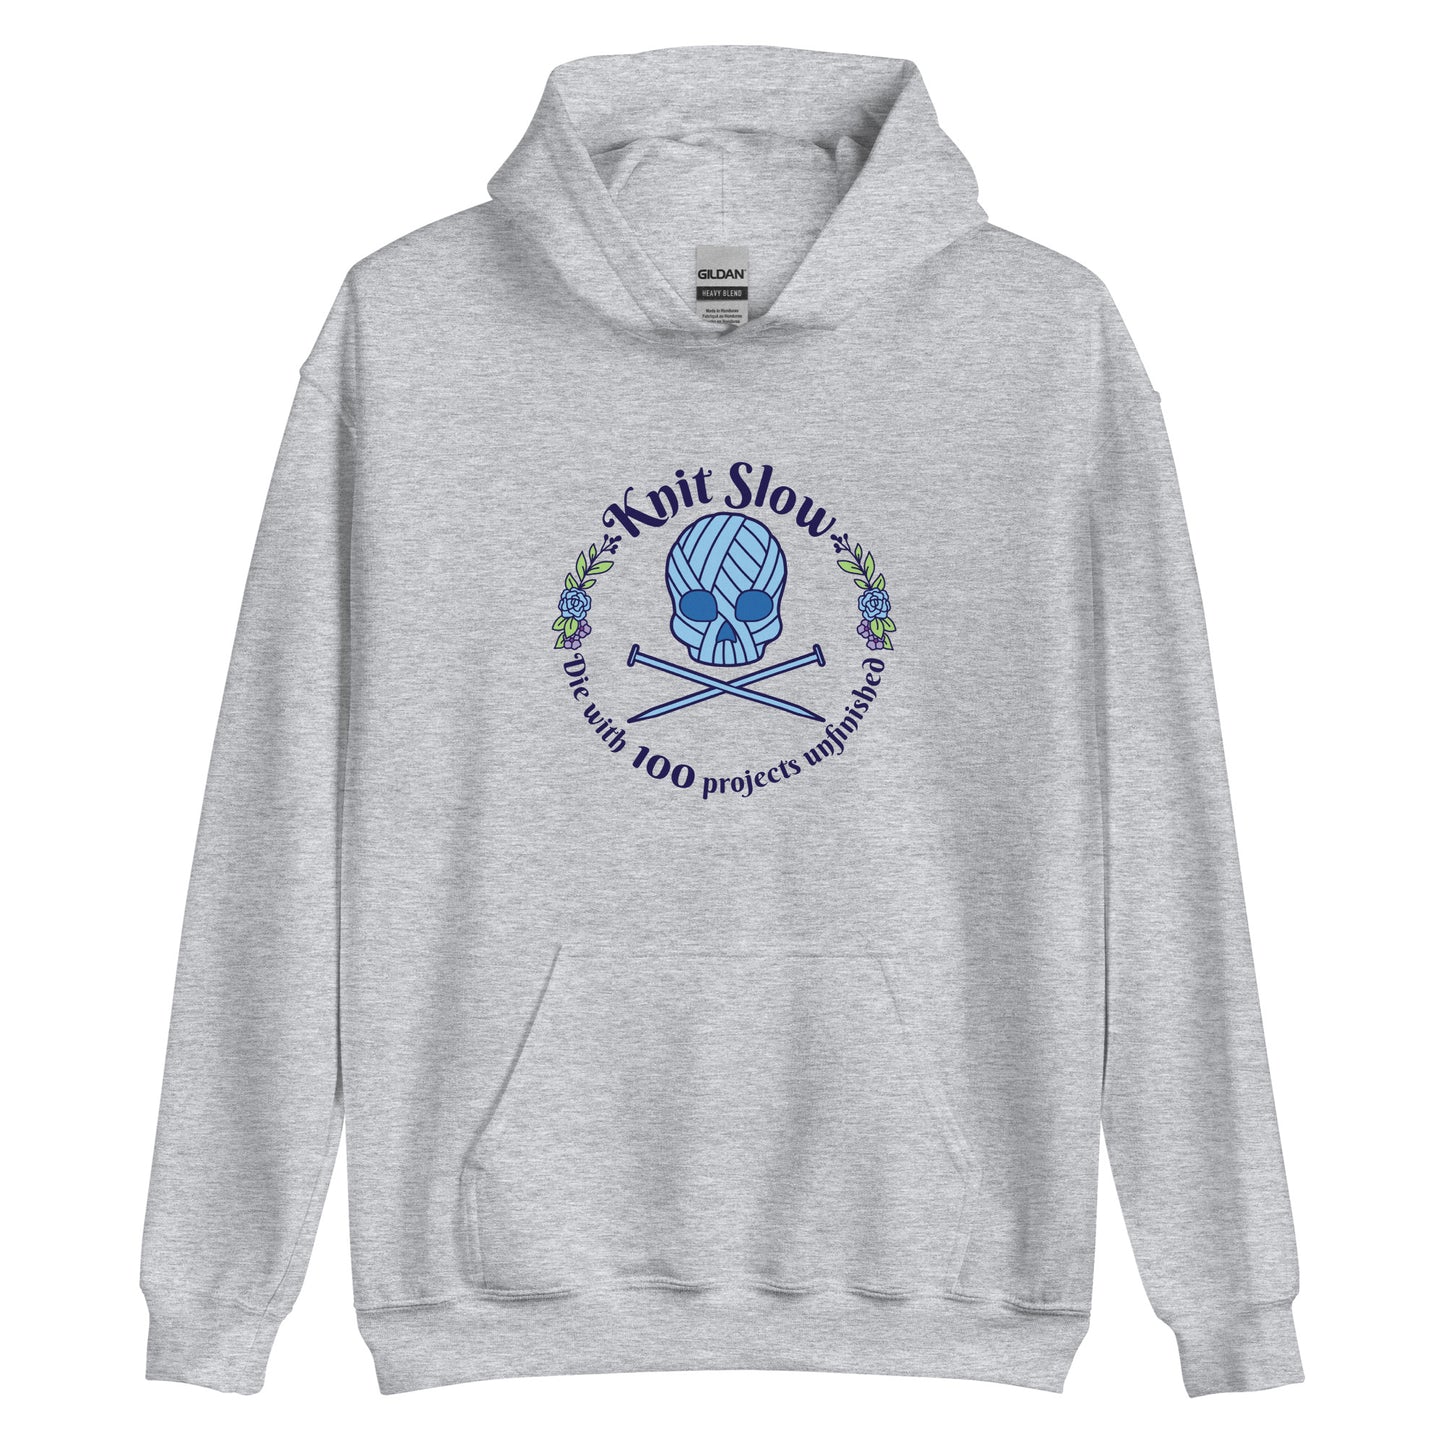 A grey hooded sweatshirt featuring an image of a skull and crossbones made of yarn and knitting needles. A floral wreath surrounds the skull, along with words that read "Knit Slow, Die with 100 projects unfinished"